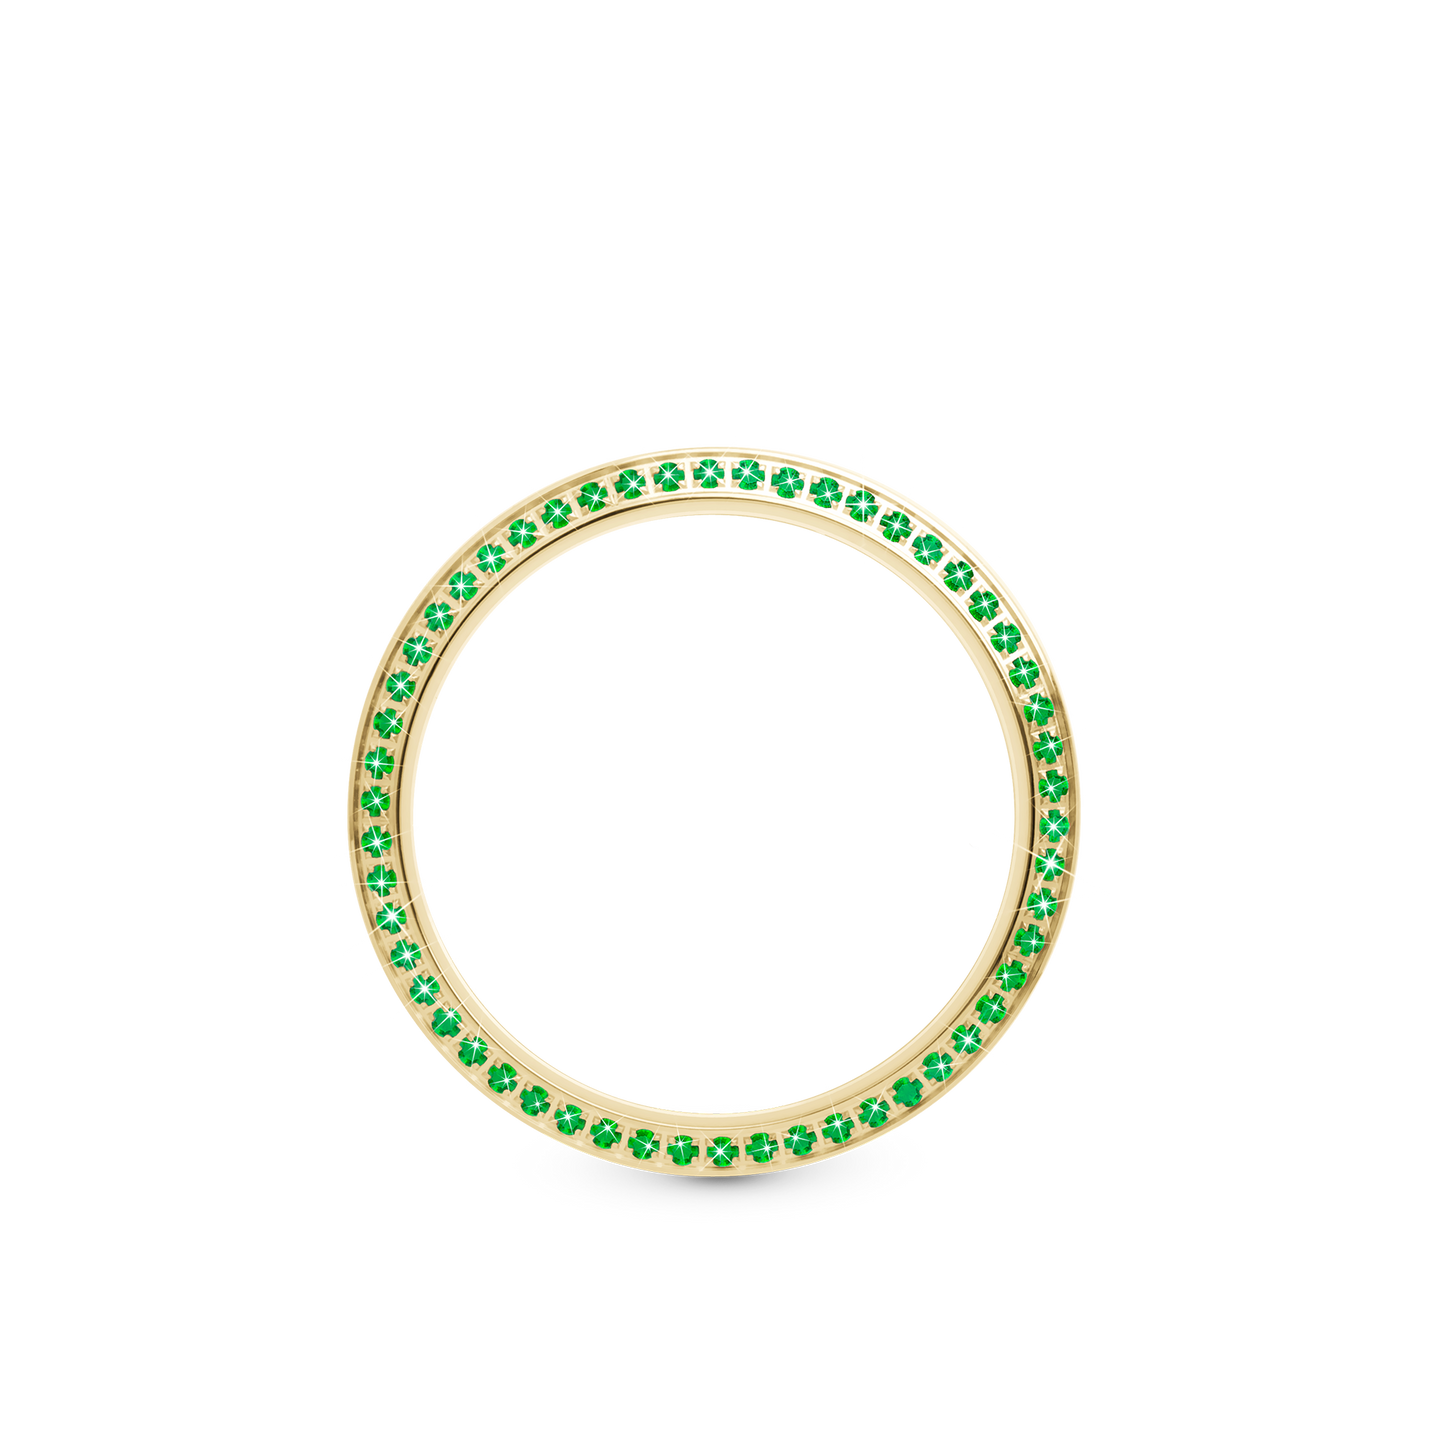 Top Bezel, Goldplated with 60 green CZ